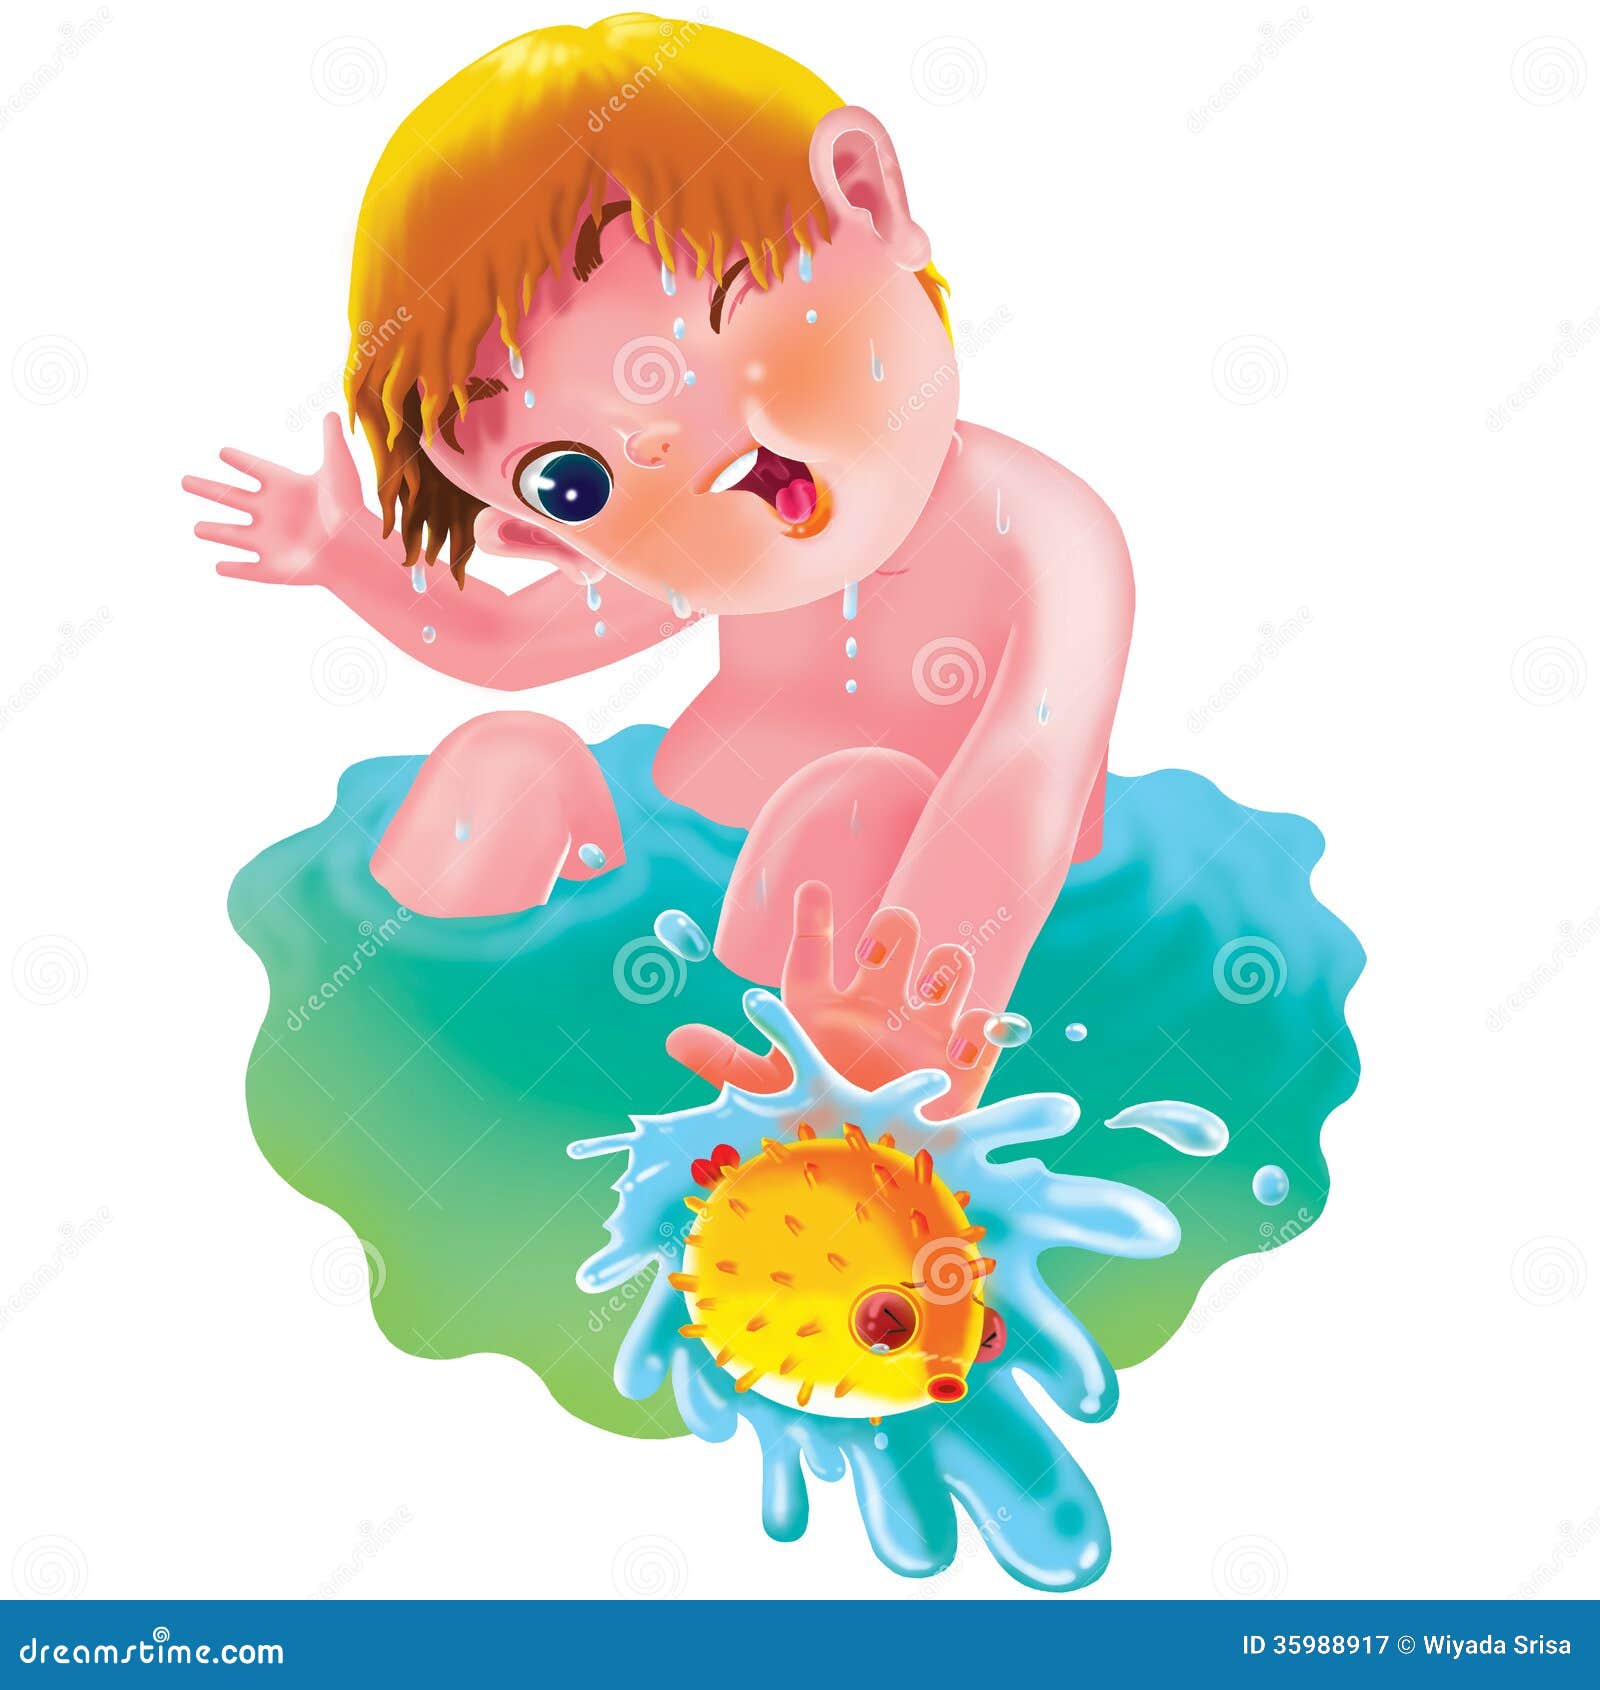 water play clipart free - photo #34